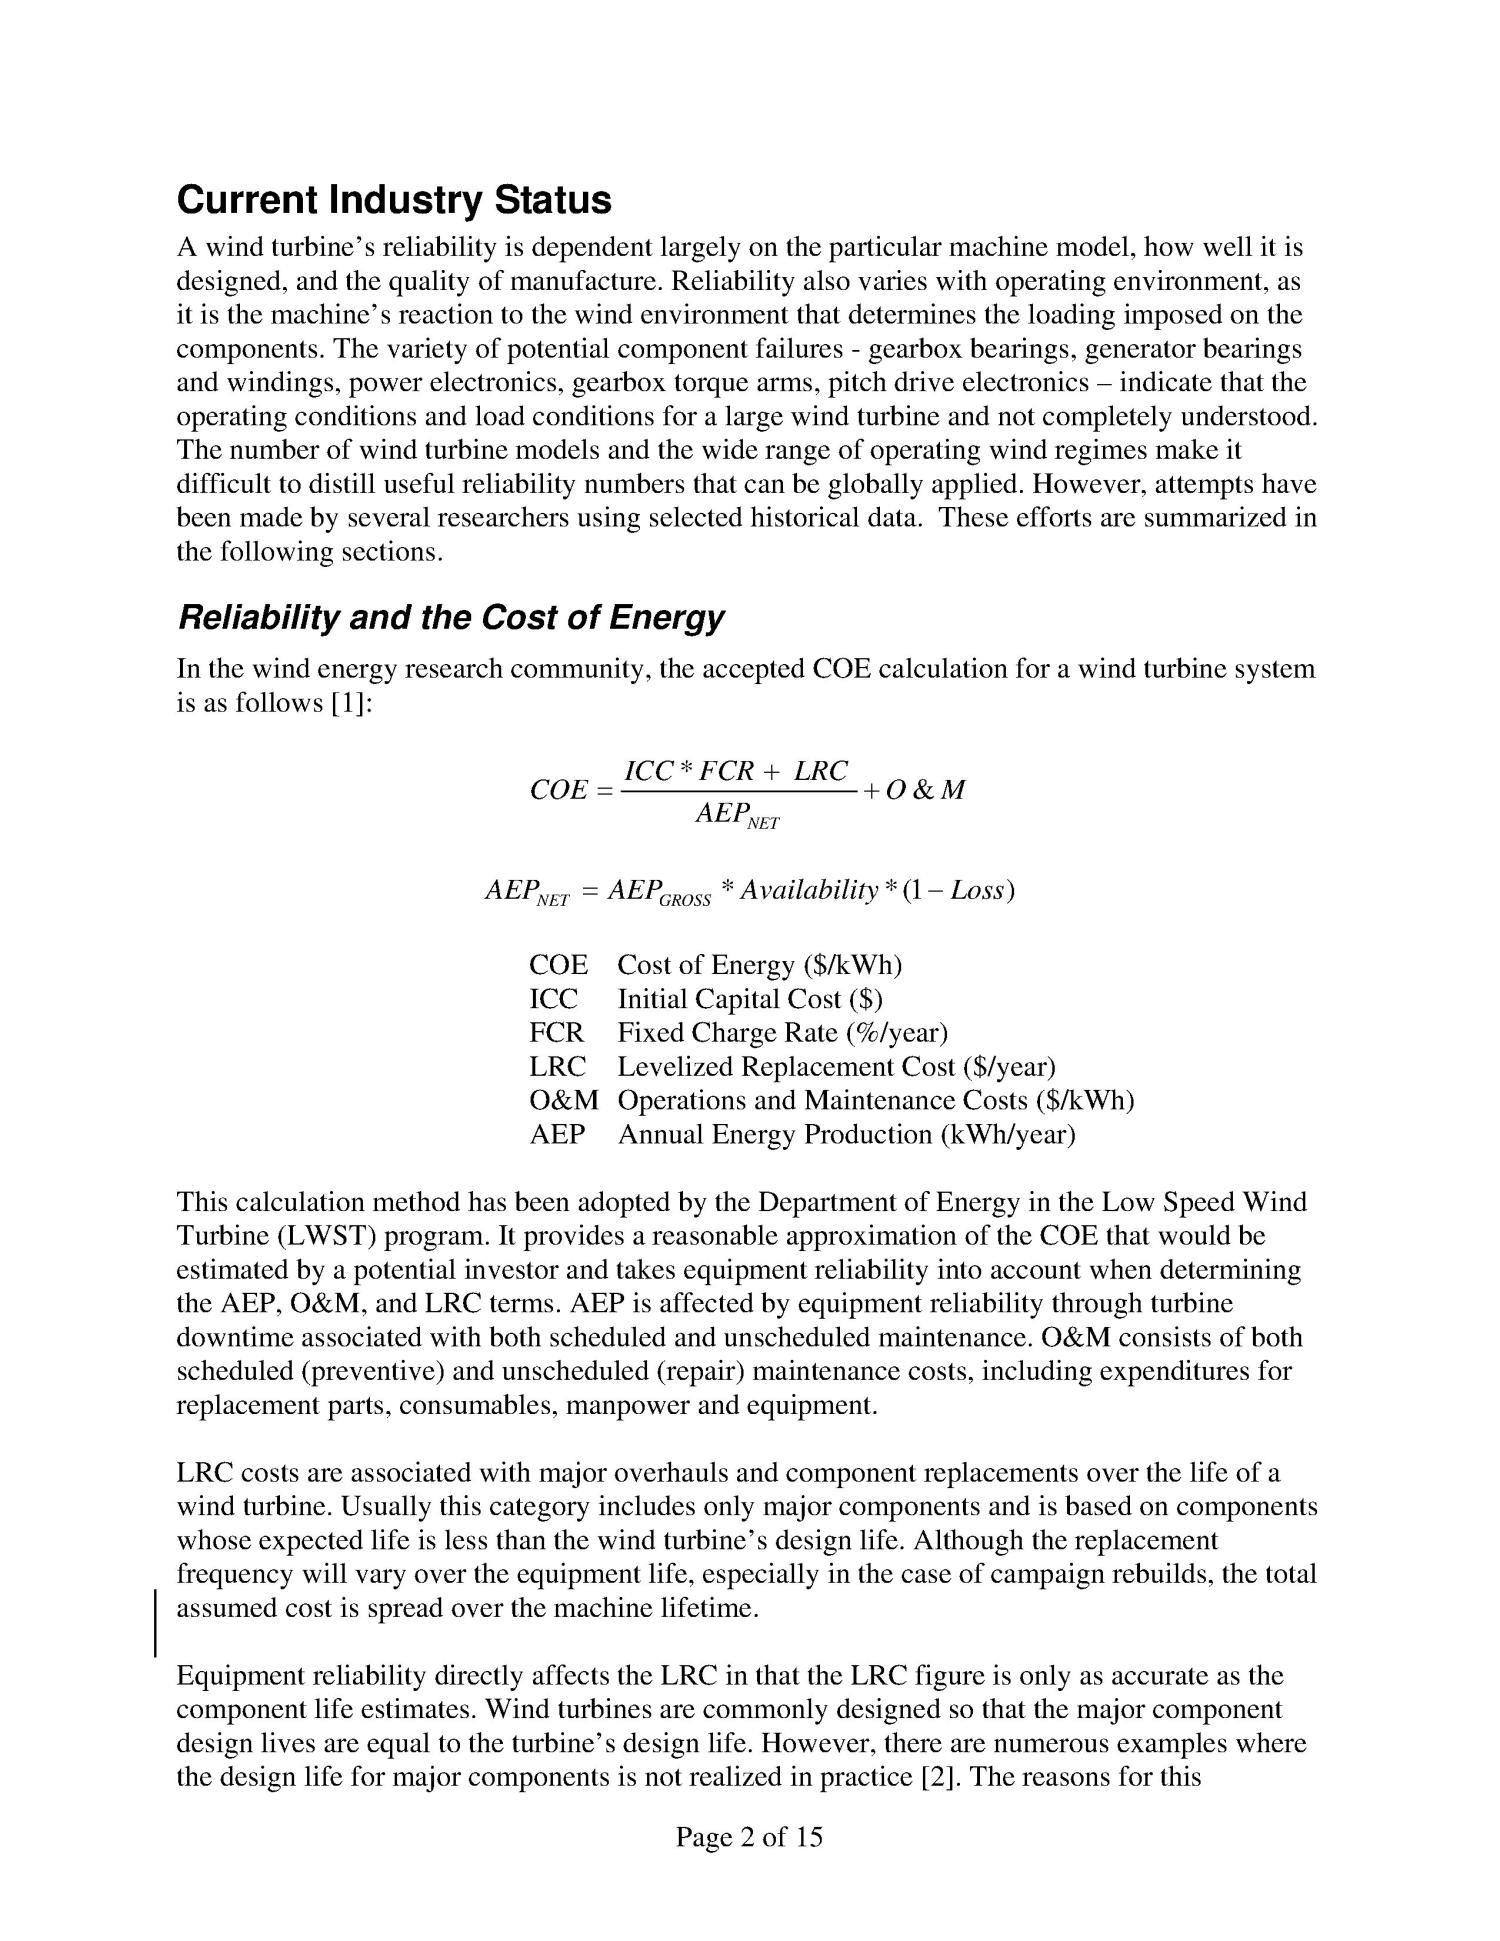 Wind turbine reliability : understanding and minimizing wind turbine operation and maintenance costs.
                                                
                                                    [Sequence #]: 2 of 15
                                                